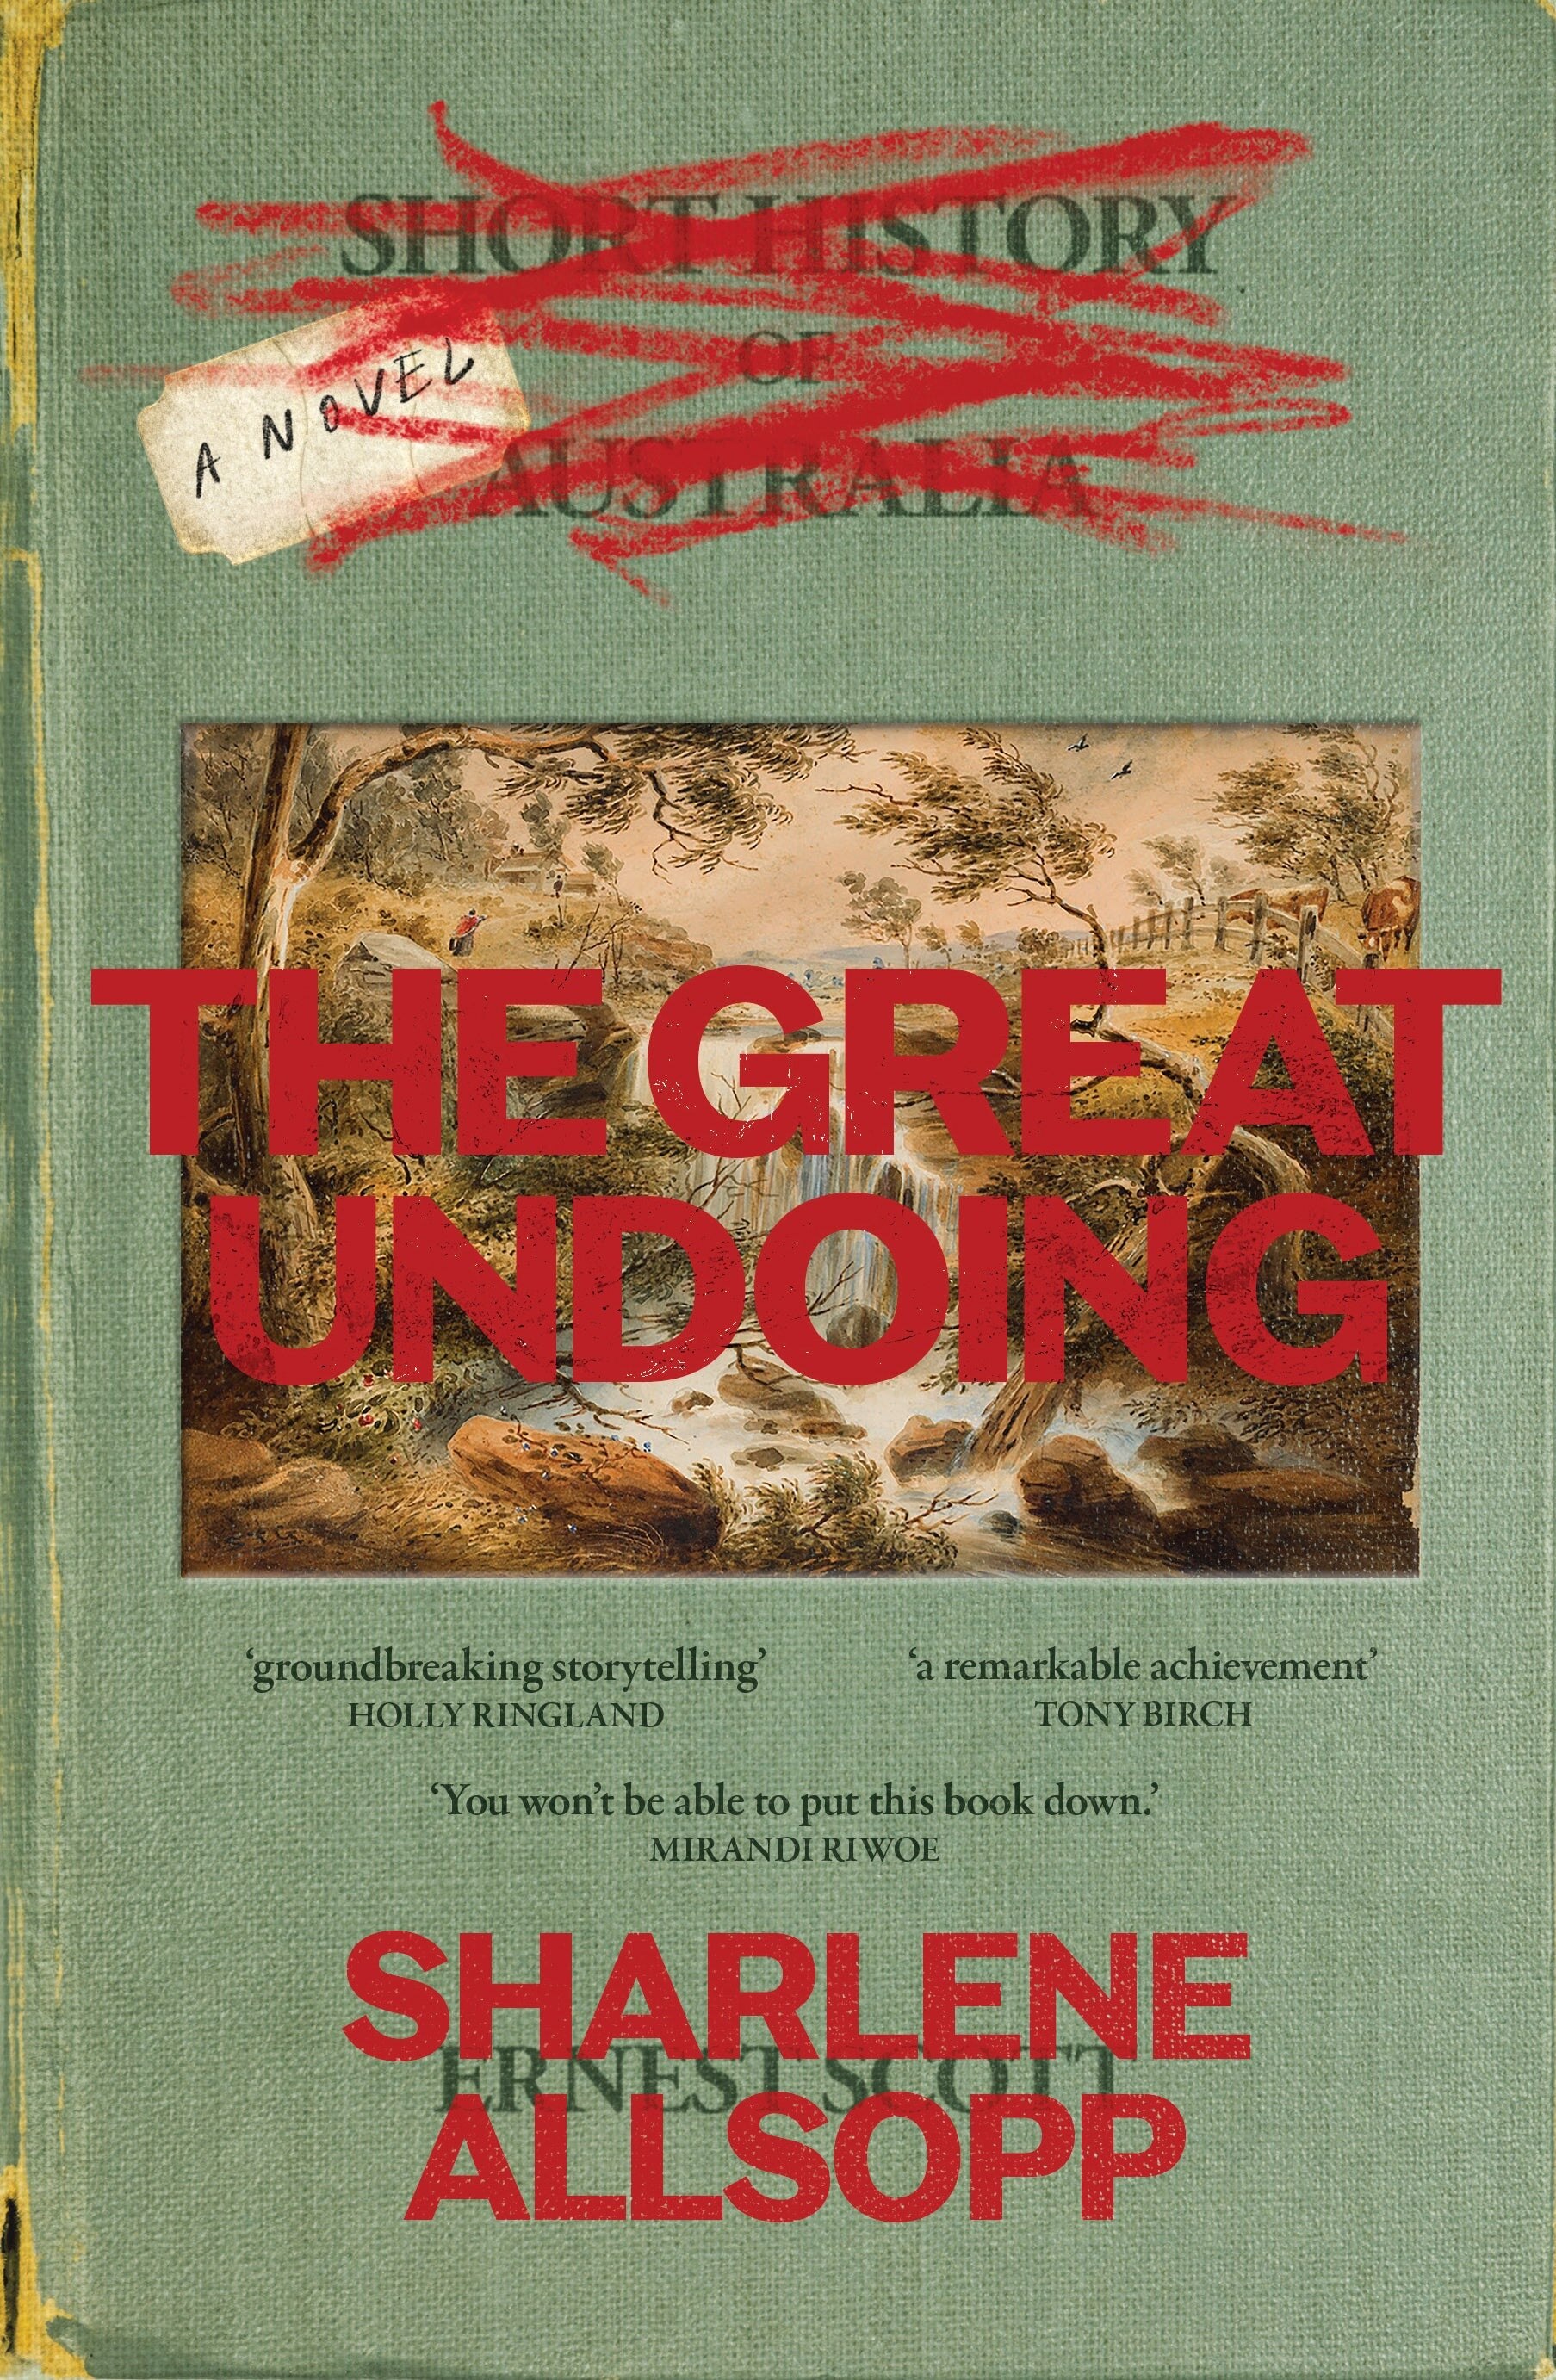 An early 20th century book cover with an image of a bush landscape with red text printed over the top